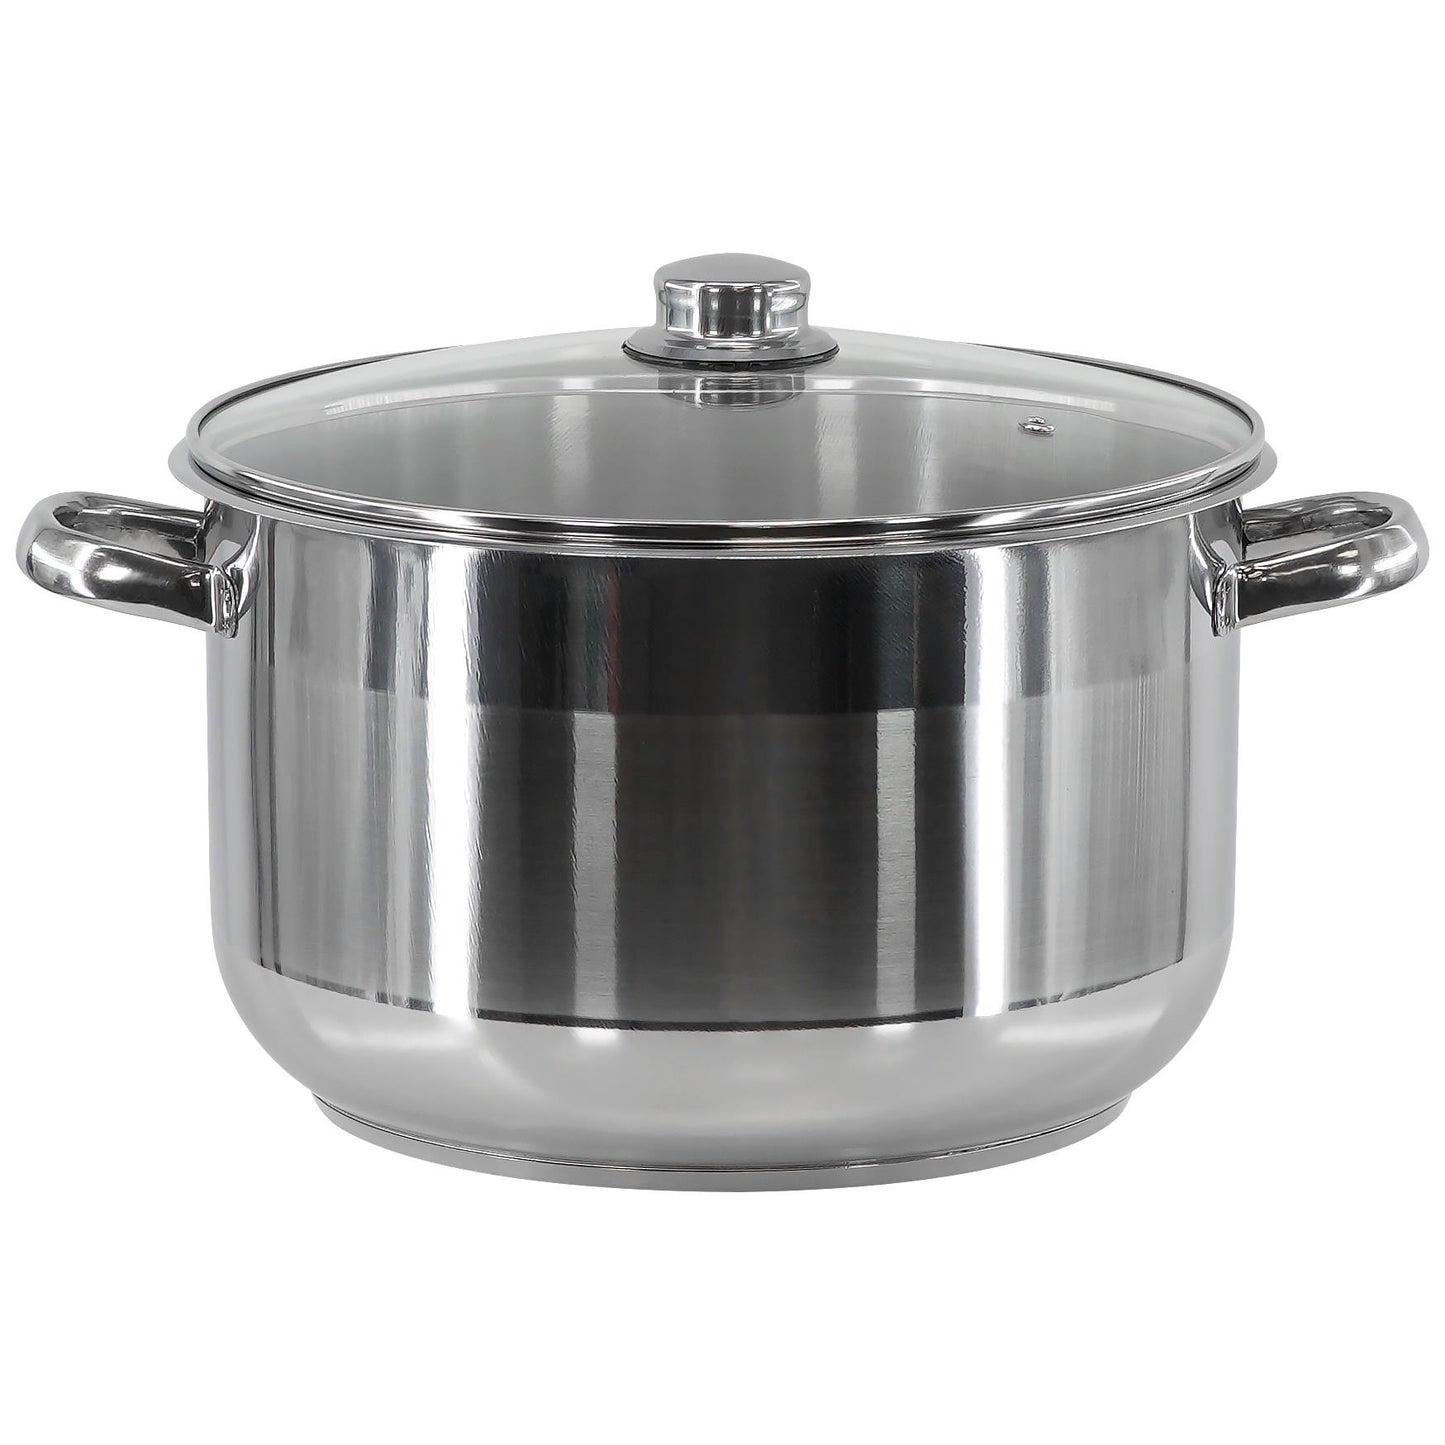 Induction Stockpot With Glass Lid - 14 ltr by GEEZY - UKBuyZone